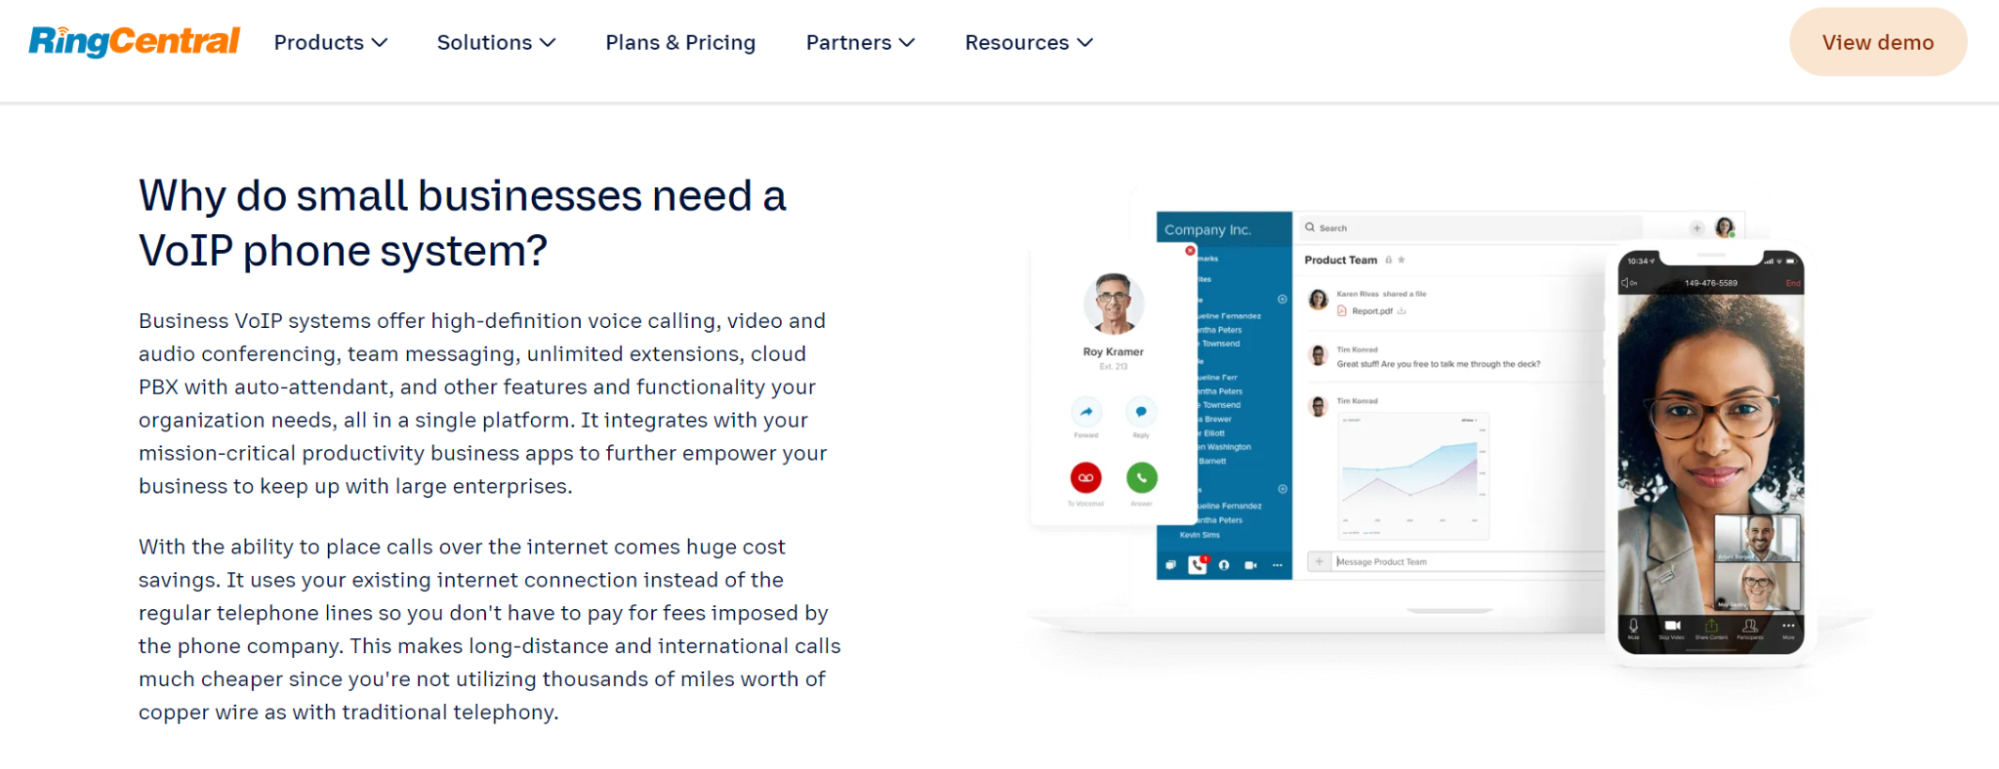 RingCentral SaaS Landing Page